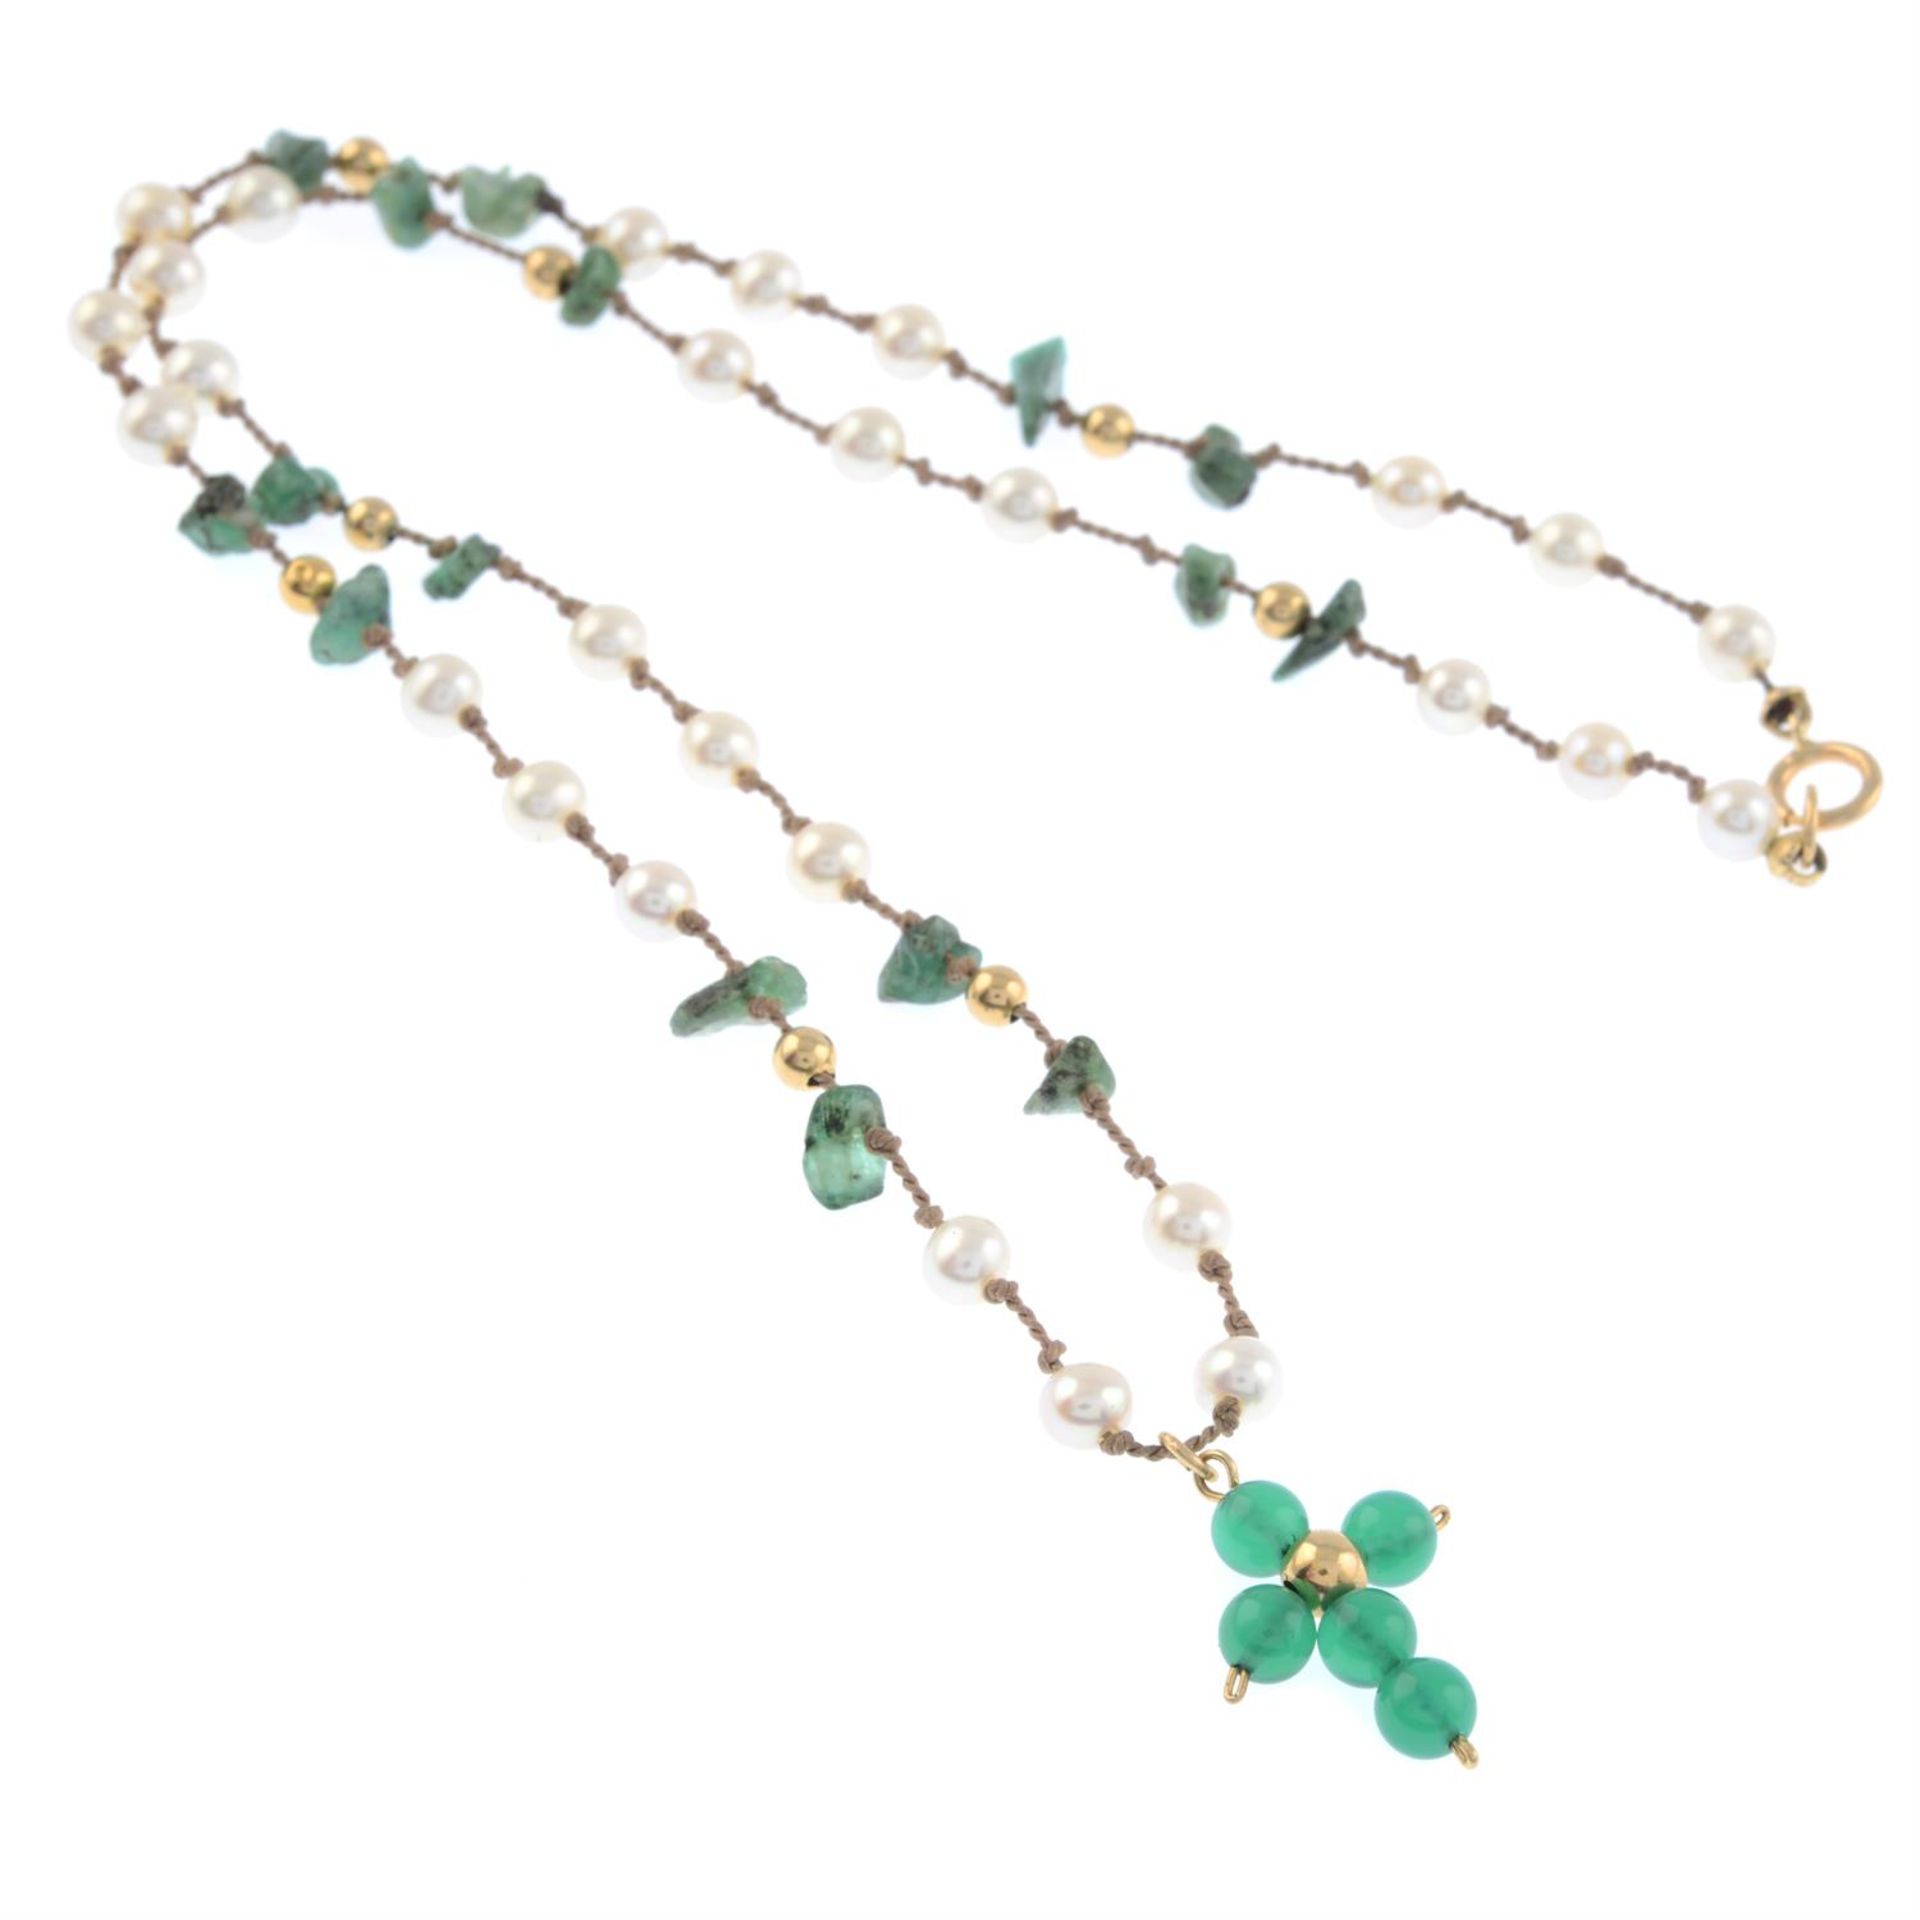 Emerald, cultured pearl & chrysoprase cross pendant necklace - Image 2 of 2